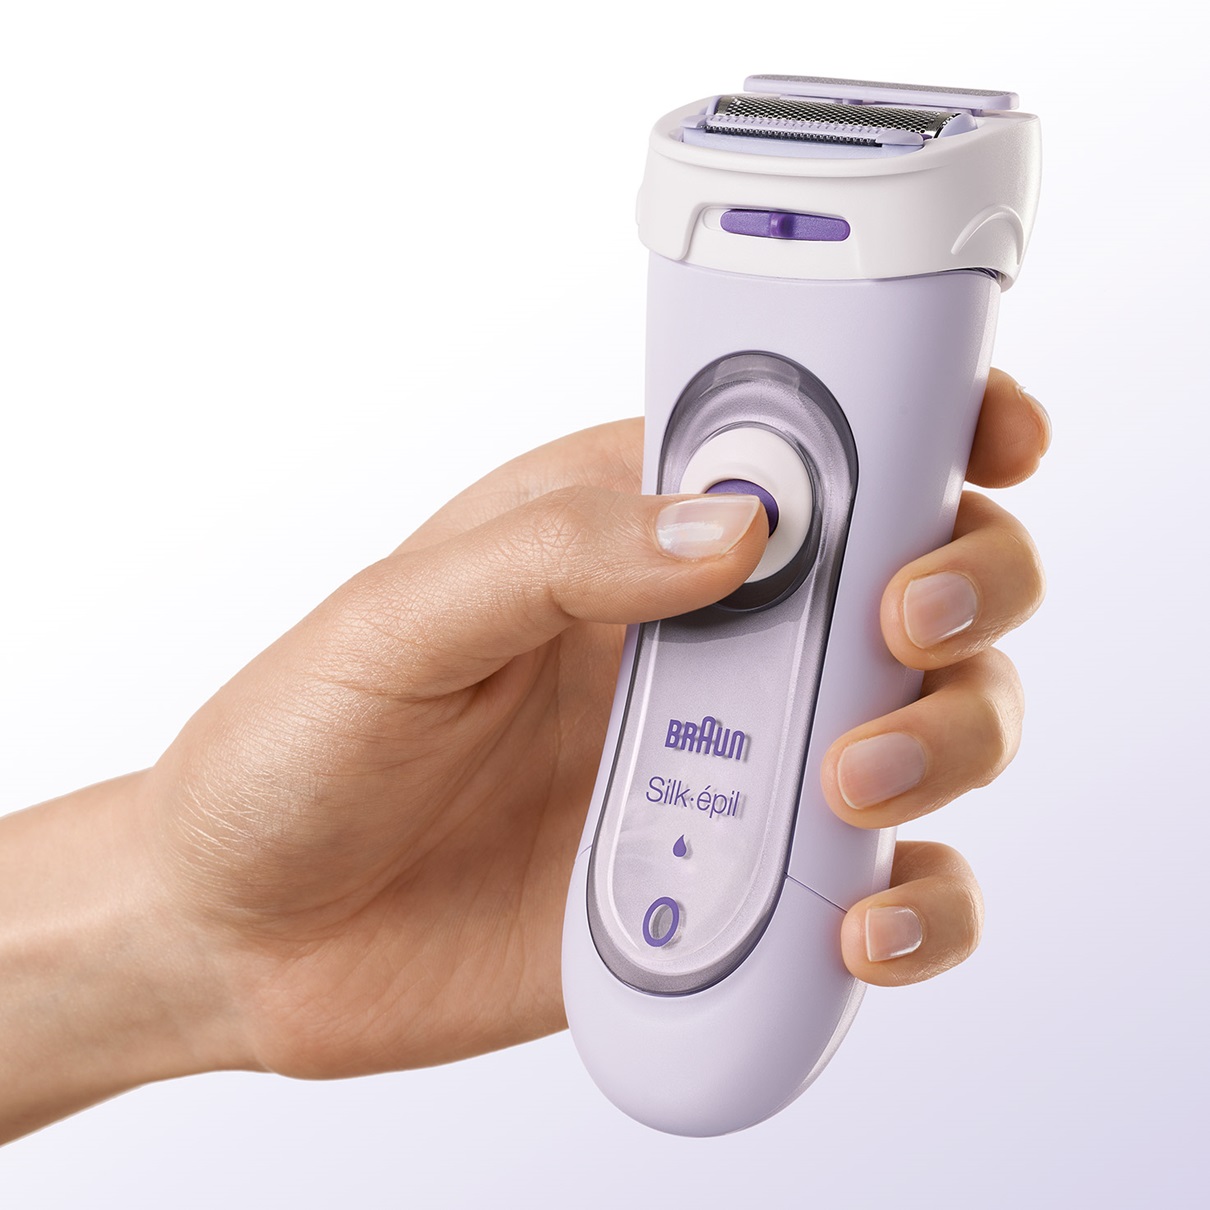 Braun Lady Shaver - 5560 Cordless Electric Shaver - in hand